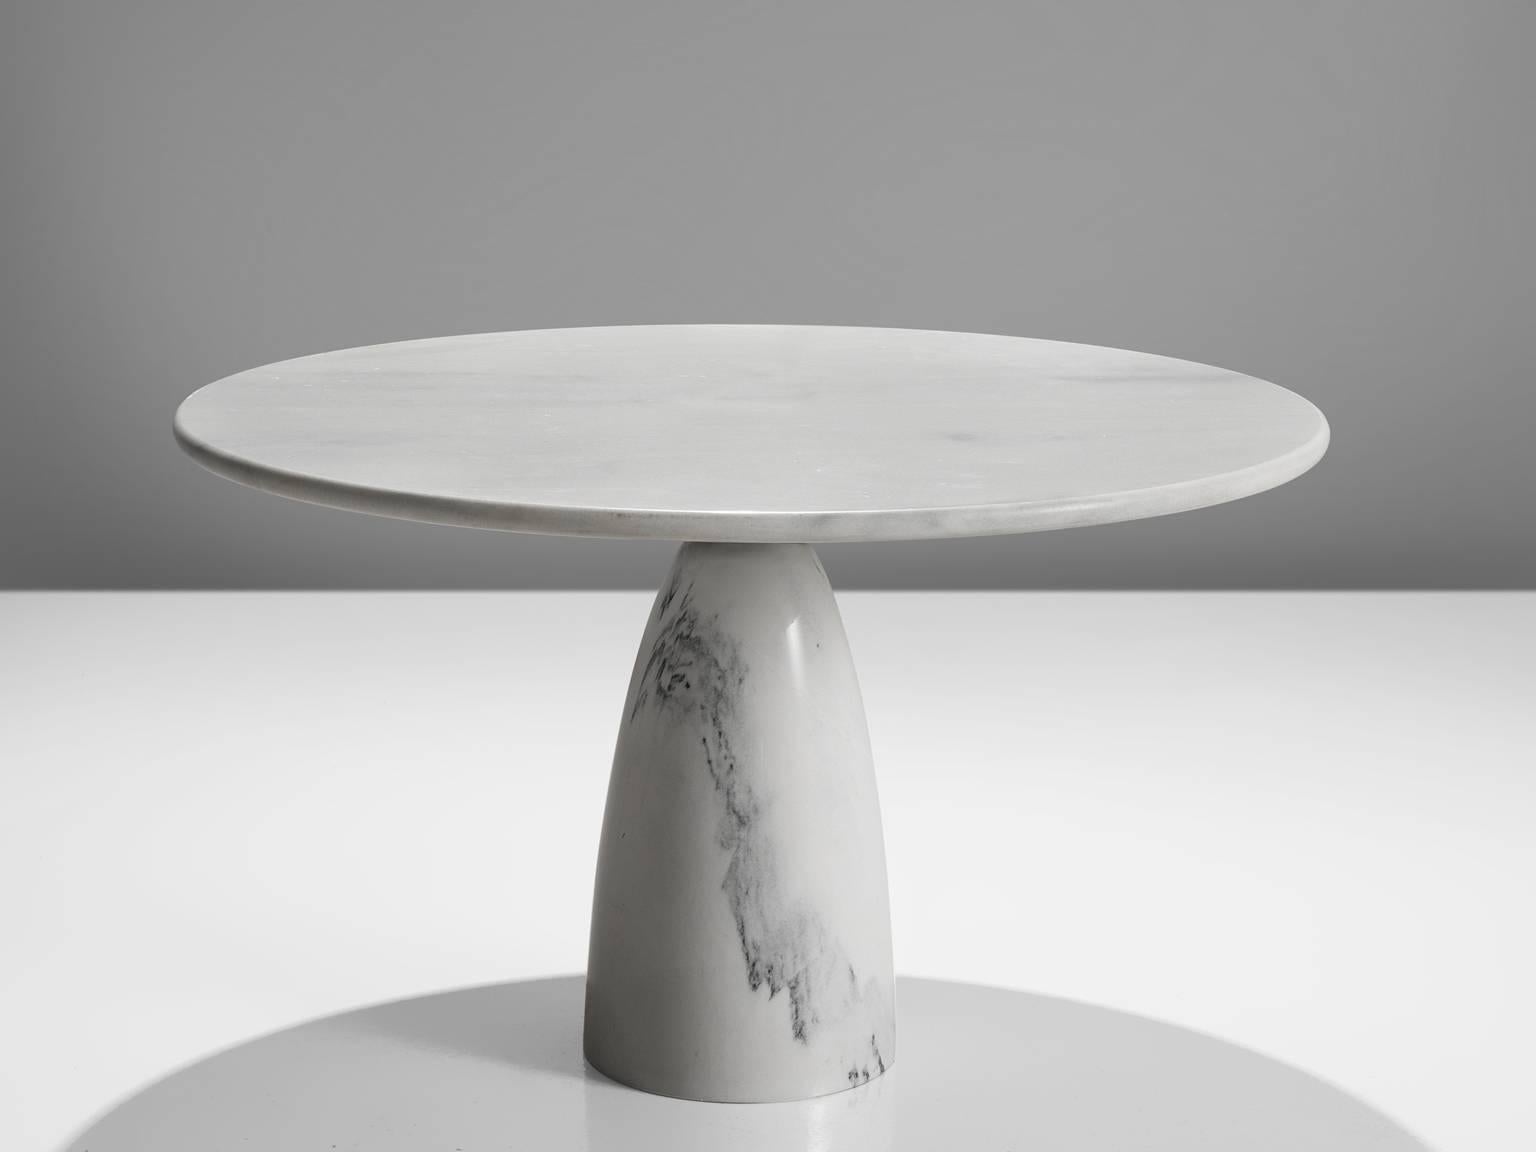 Dining table, white marble, metal, Germany, circa 1972.

This strong center table features a colon foot and a thick circular tabletop. The aesthetics are archetypical for postmodern design, bearing references to architectural forms and without a